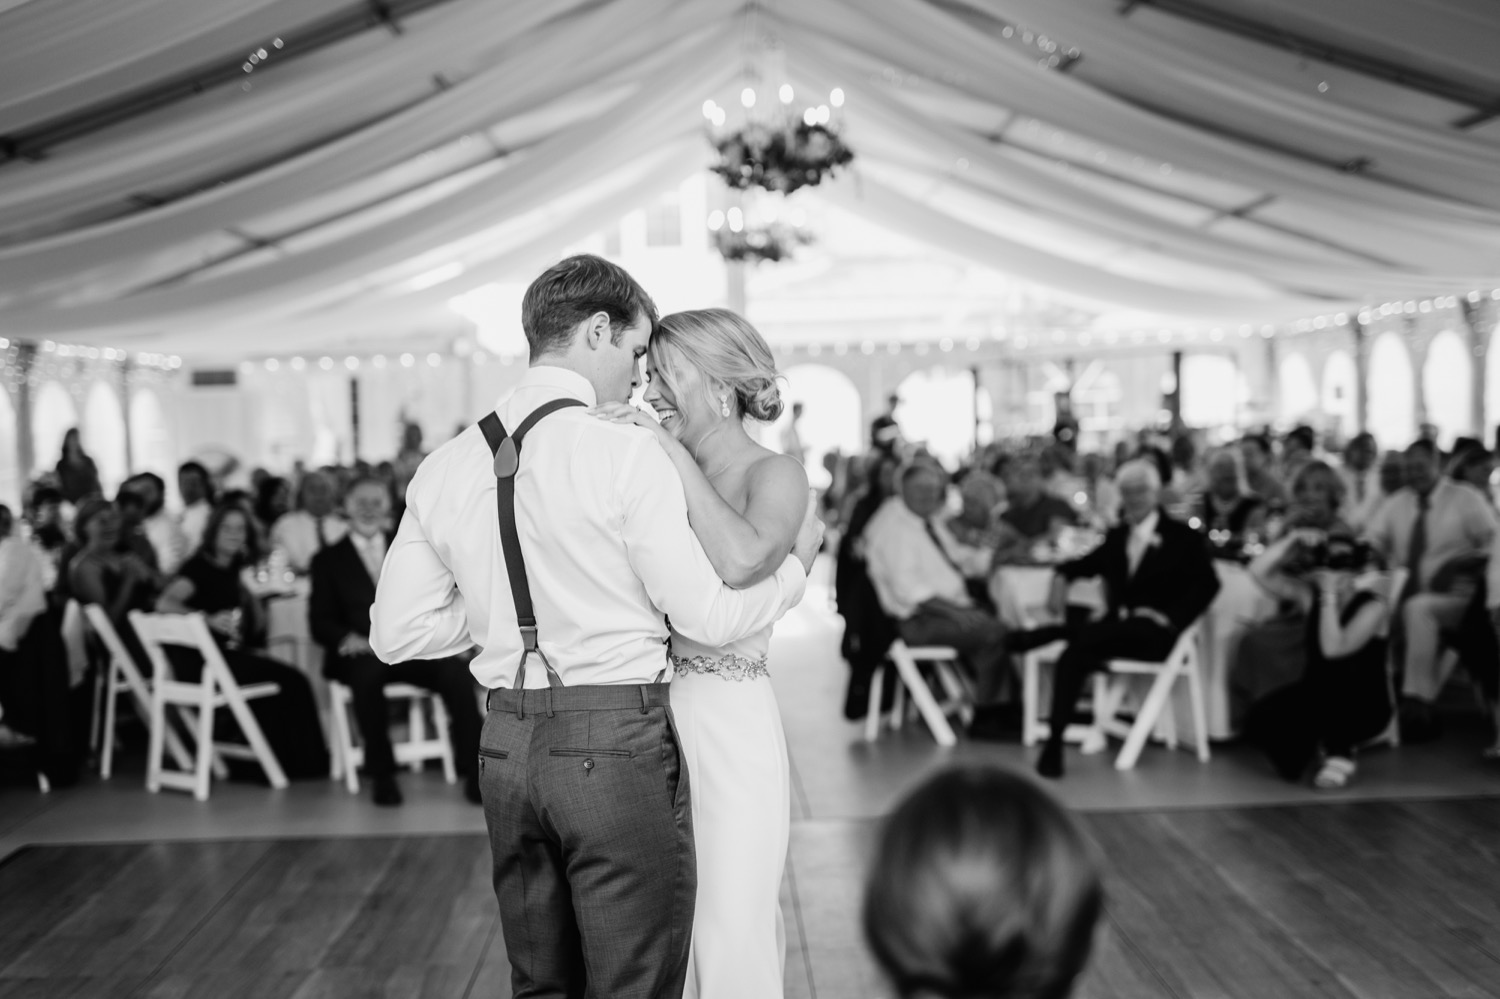 Bride and groom sharing their first dance during wedding reception at Amber Grove in Richmond, Virginia